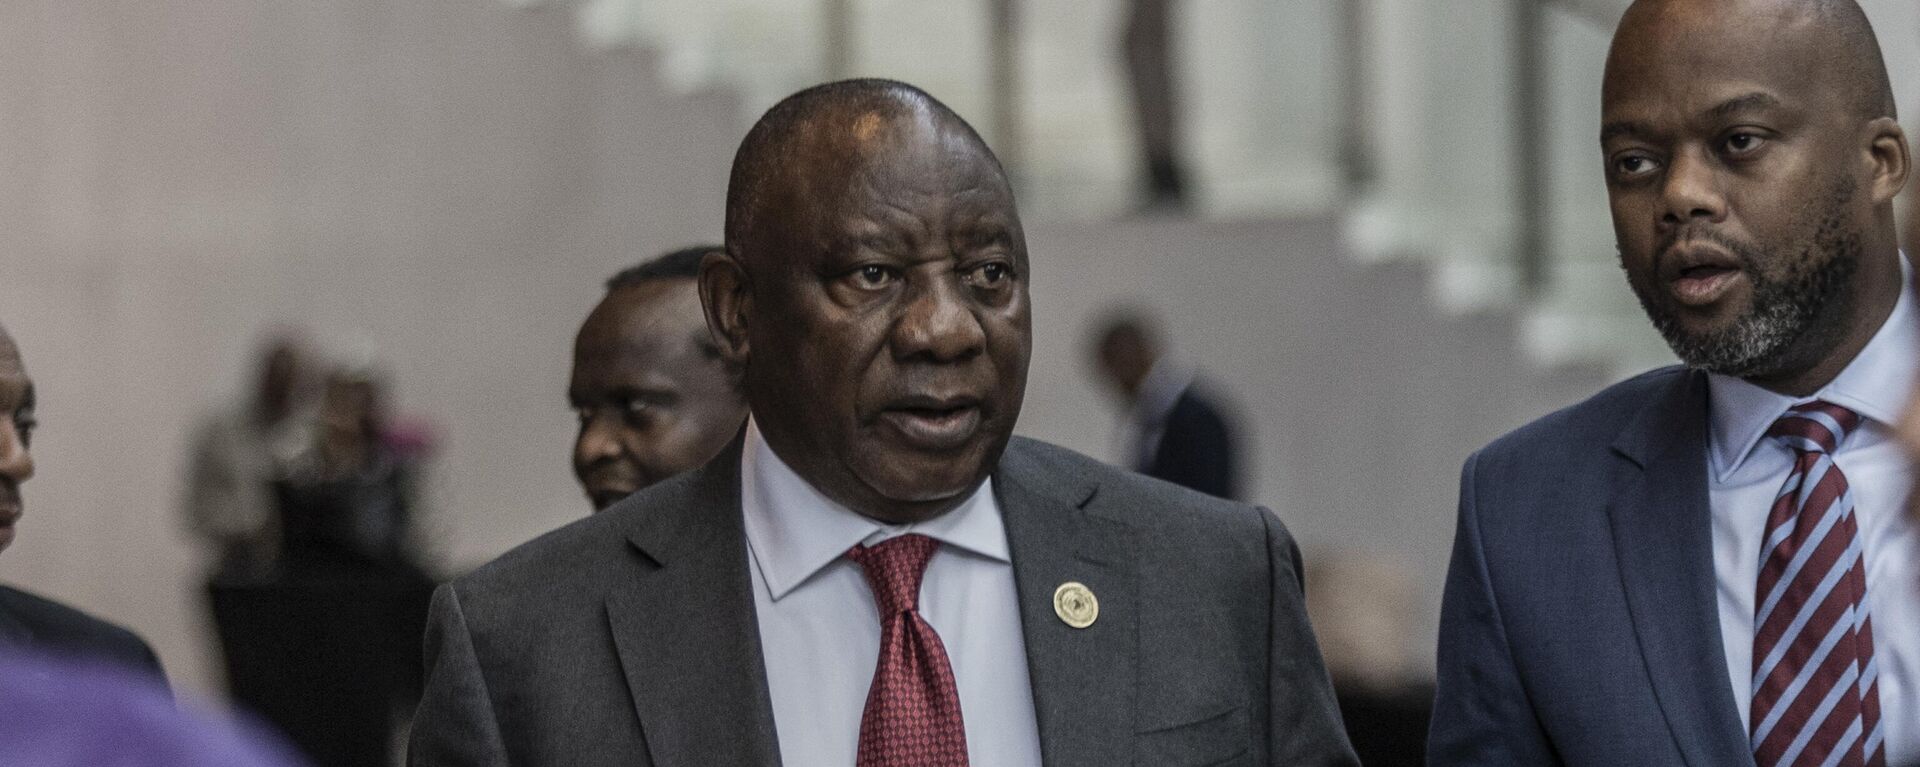 South African President Cyril Ramaphosa (C) arrives on the second day of the 36th Ordinary Session of the Assembly of the African Union (AU) at the Africa Union headquarters in Addis Ababa on February 19, 2023. - Sputnik International, 1920, 07.03.2023